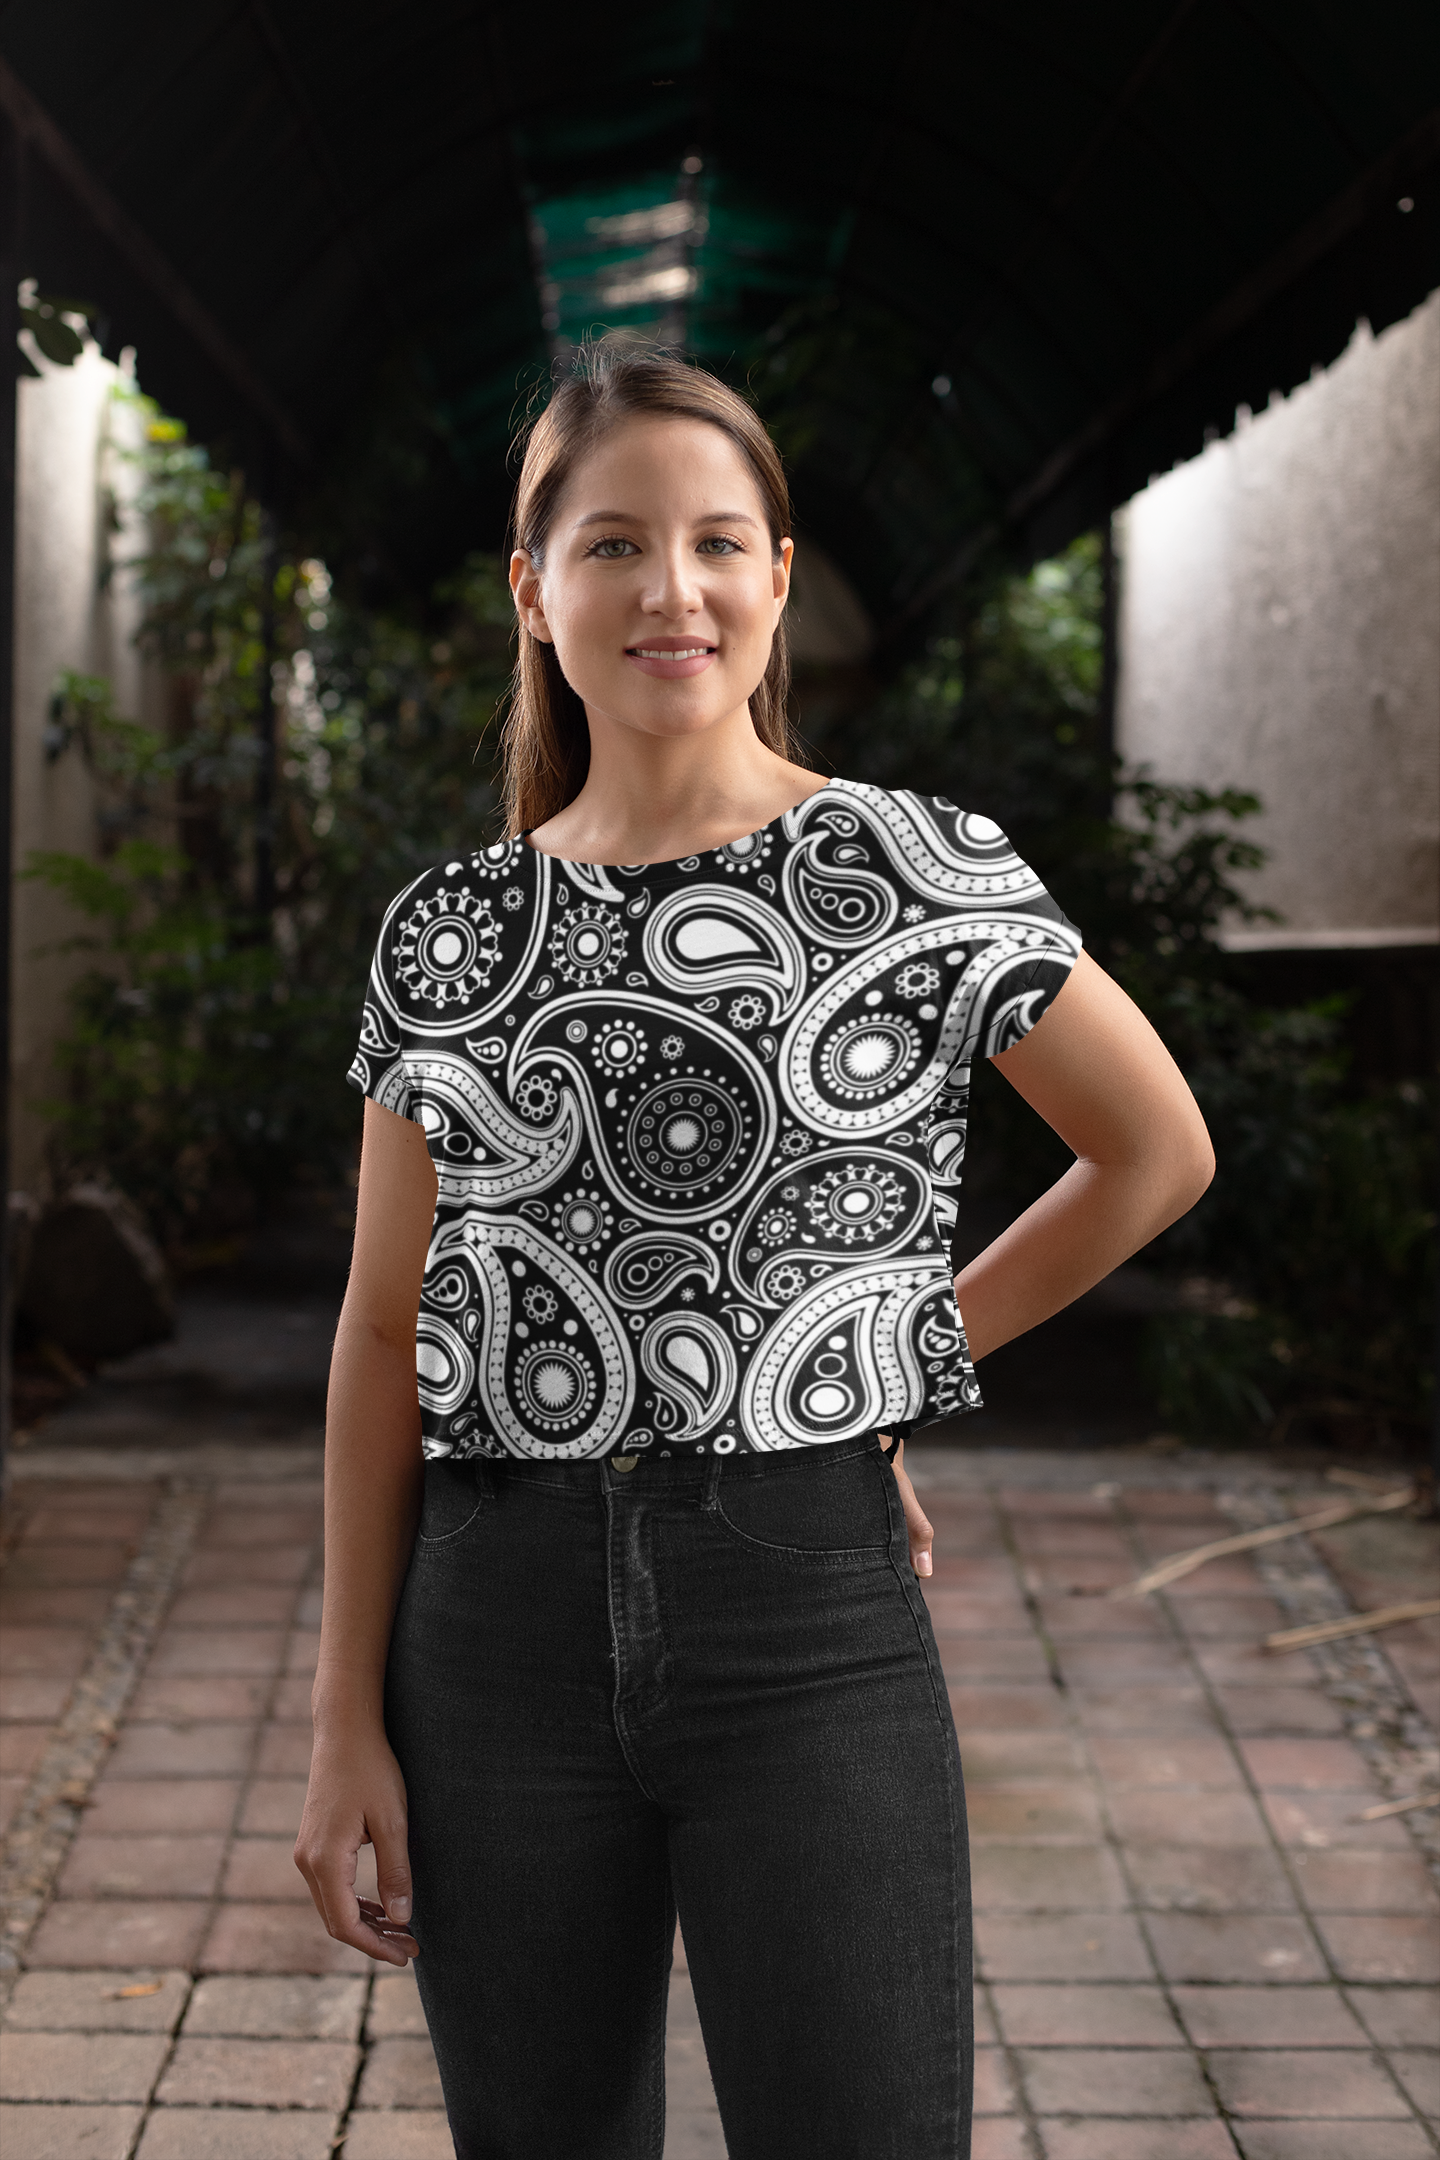 Paisley Print Black And White Crop Top For Women